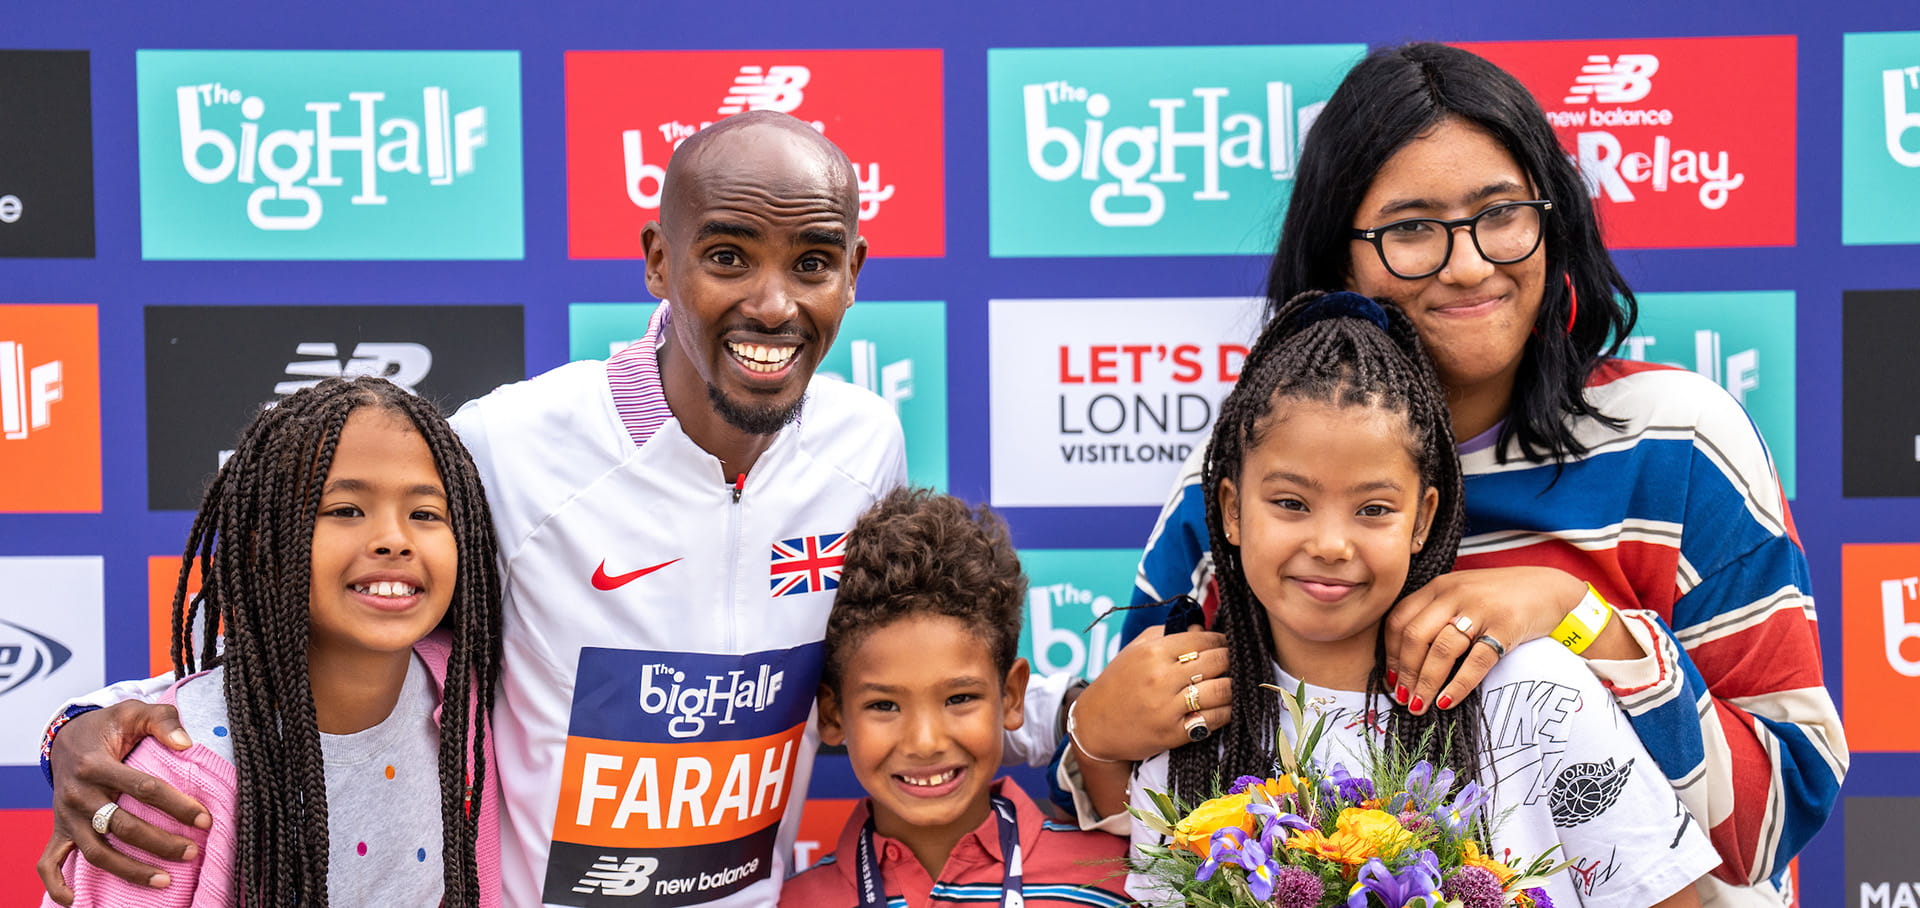 Mo Farah with his wife and children at end of The Big Half 2022